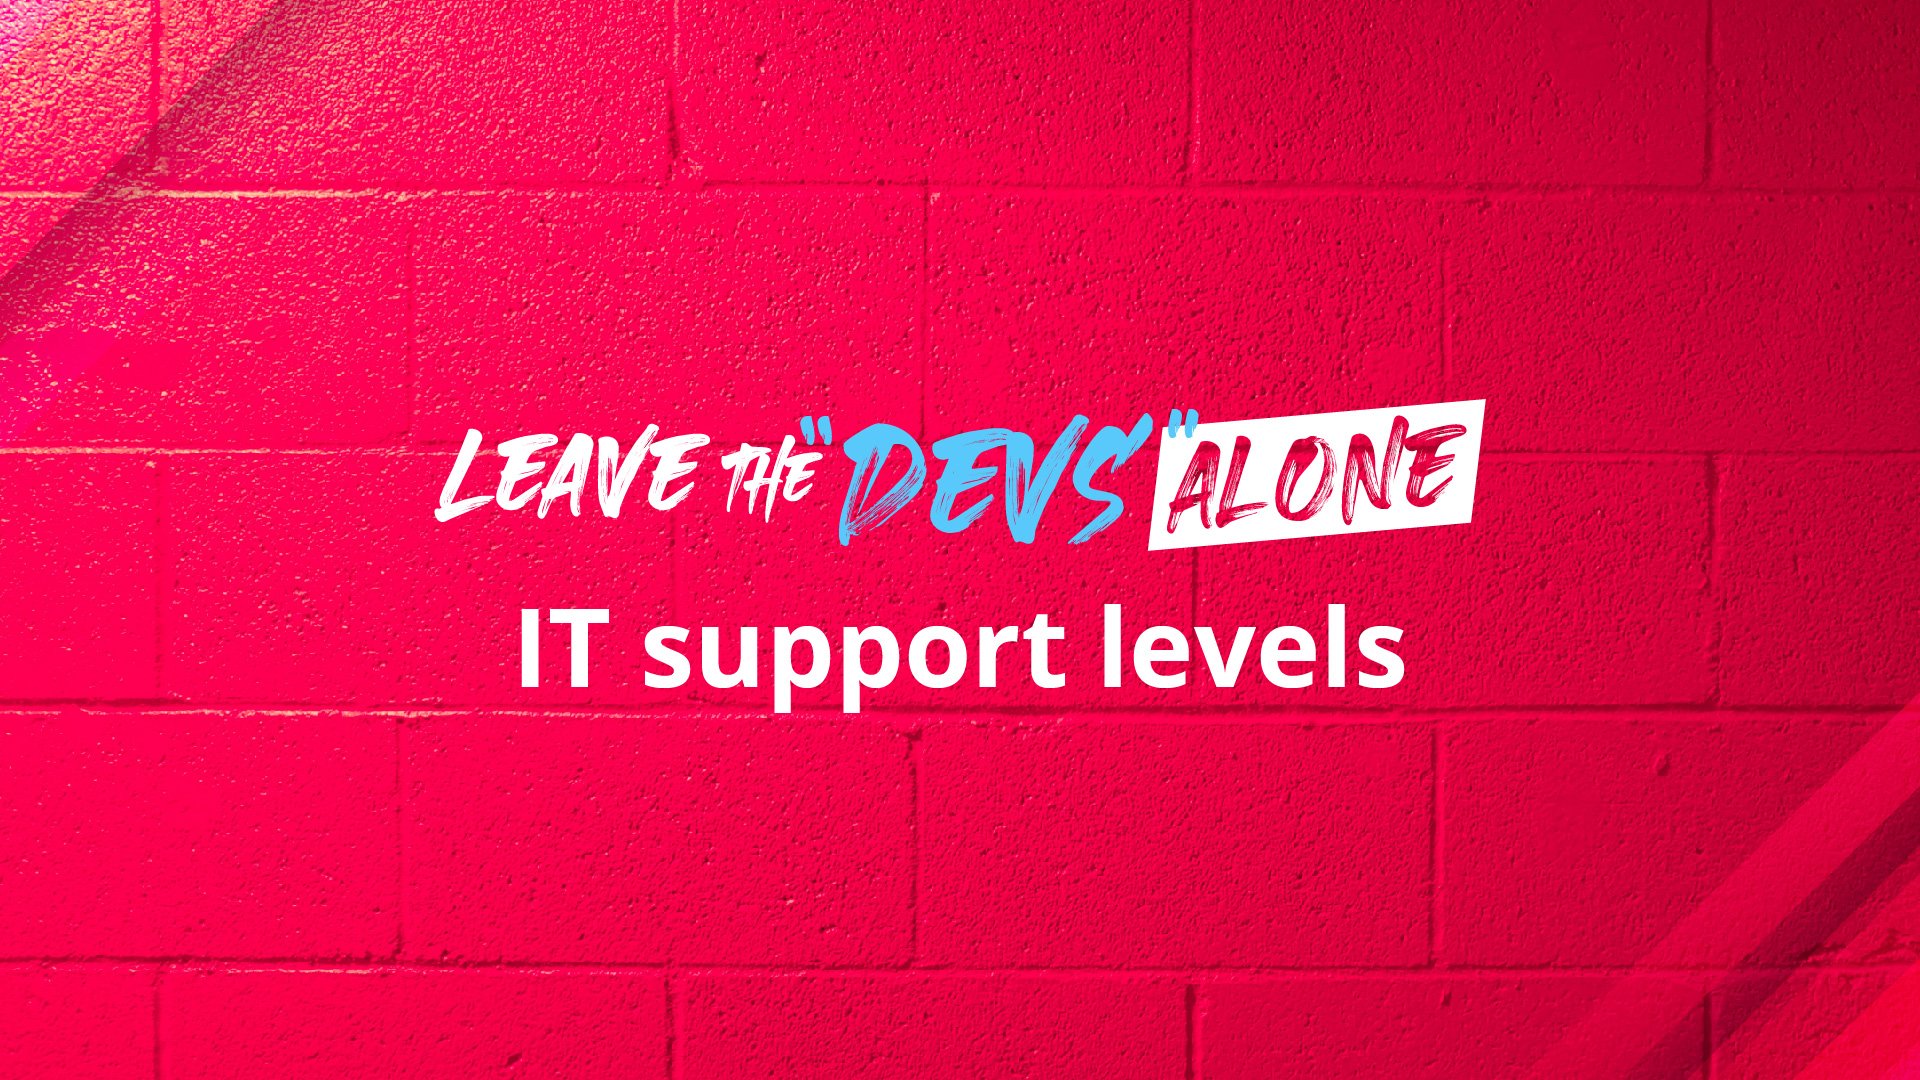 IT Support levels: 4 layers to address technology issues